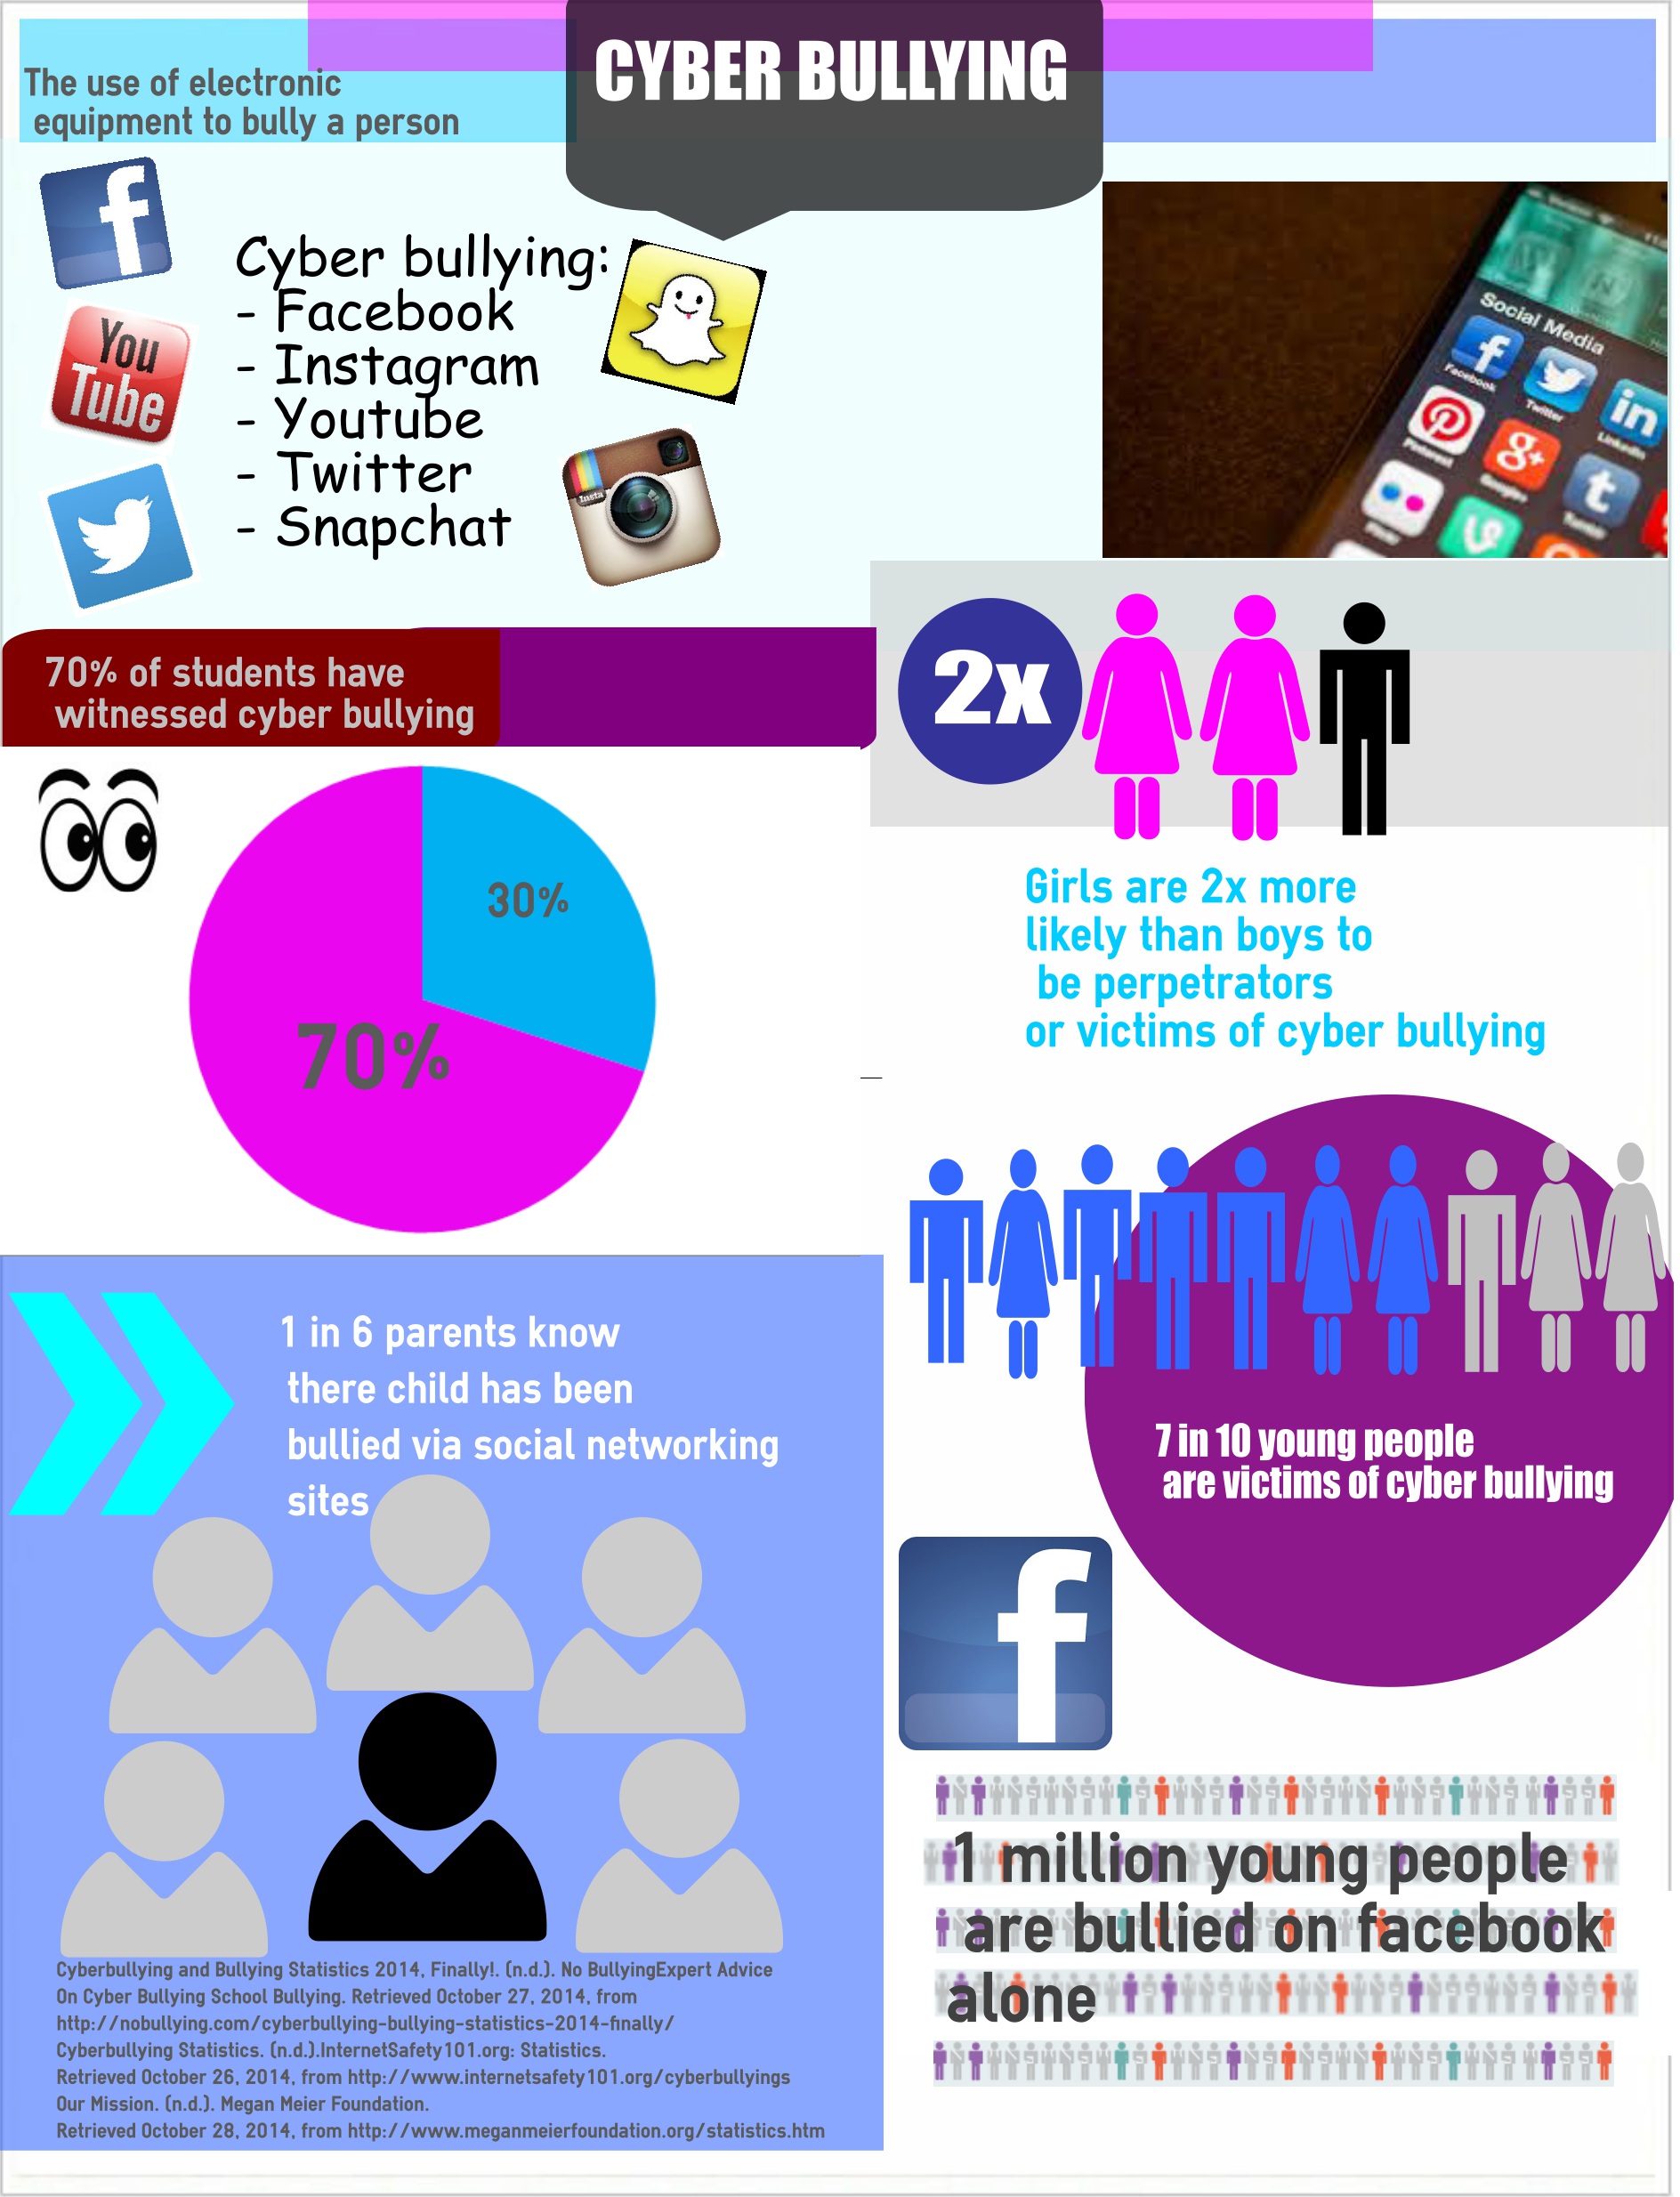 Cyber Bullying Facts | Visual.ly